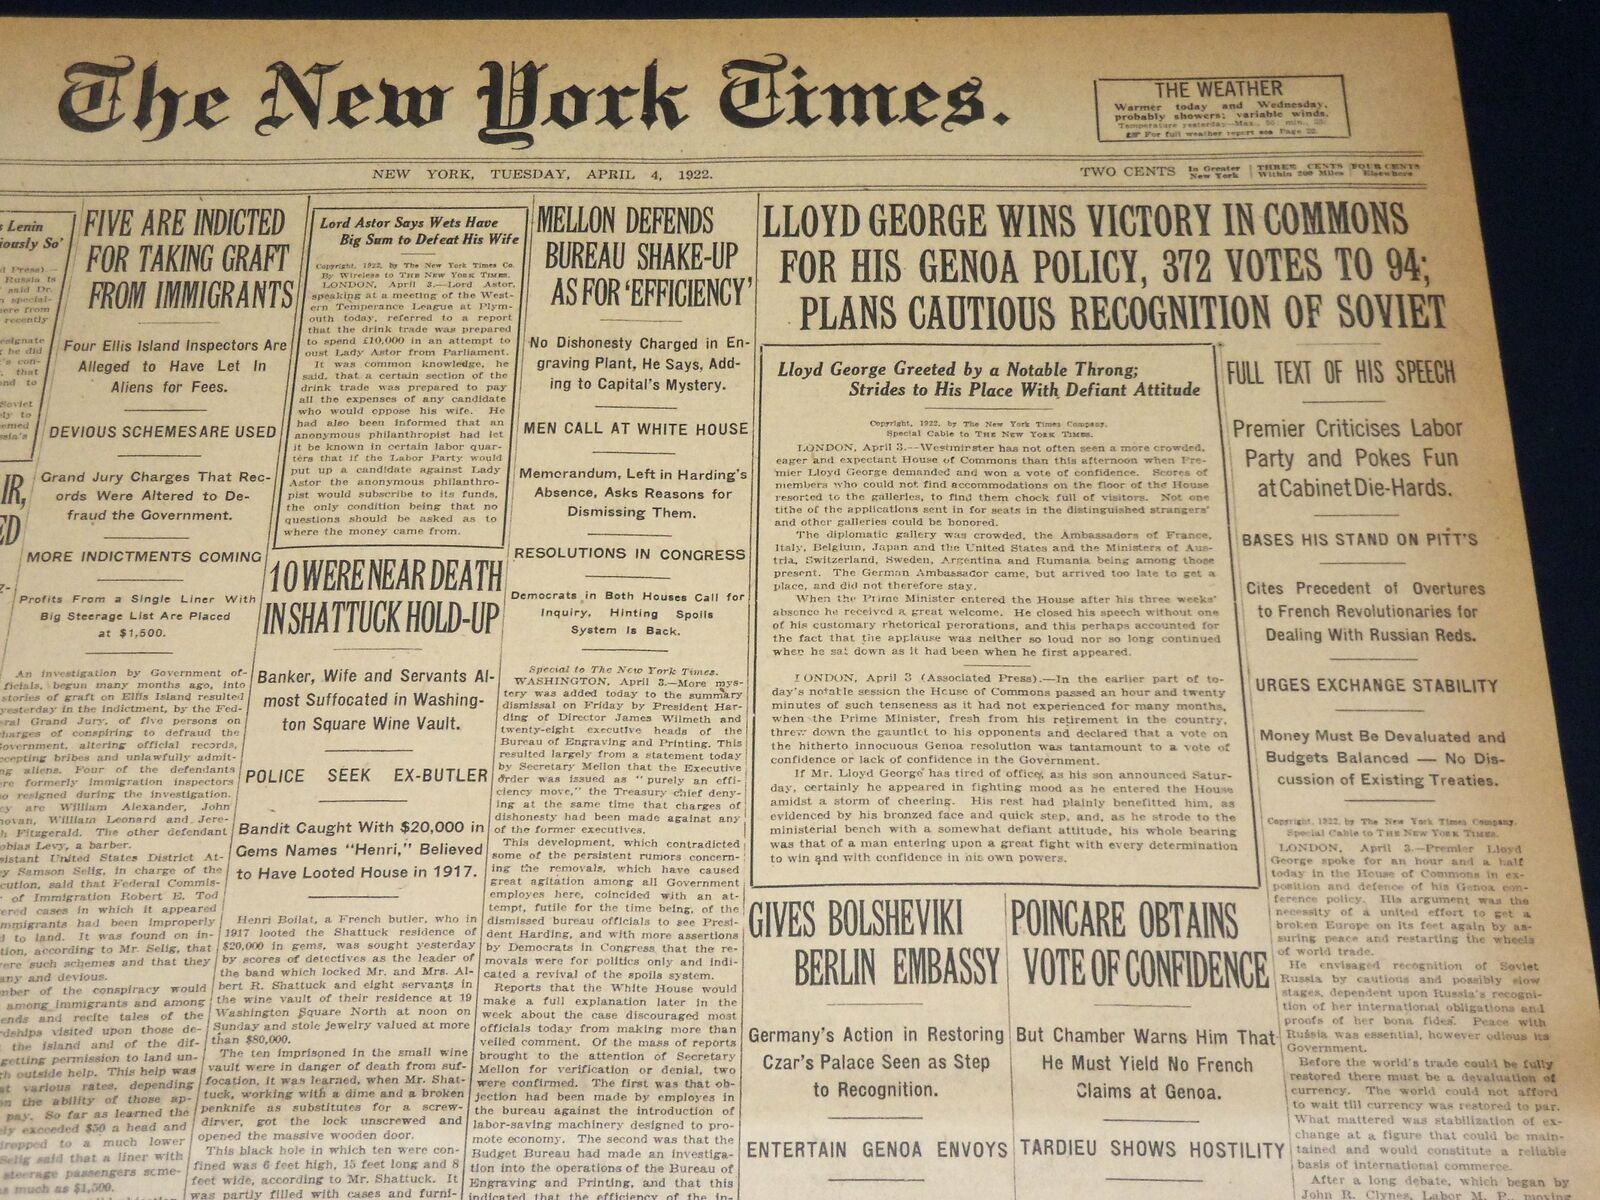 1922 APRIL 4 NEW YORK TIMES - LLOYD GEORGE WINS VICTORY IN COMMONS - NT 8578